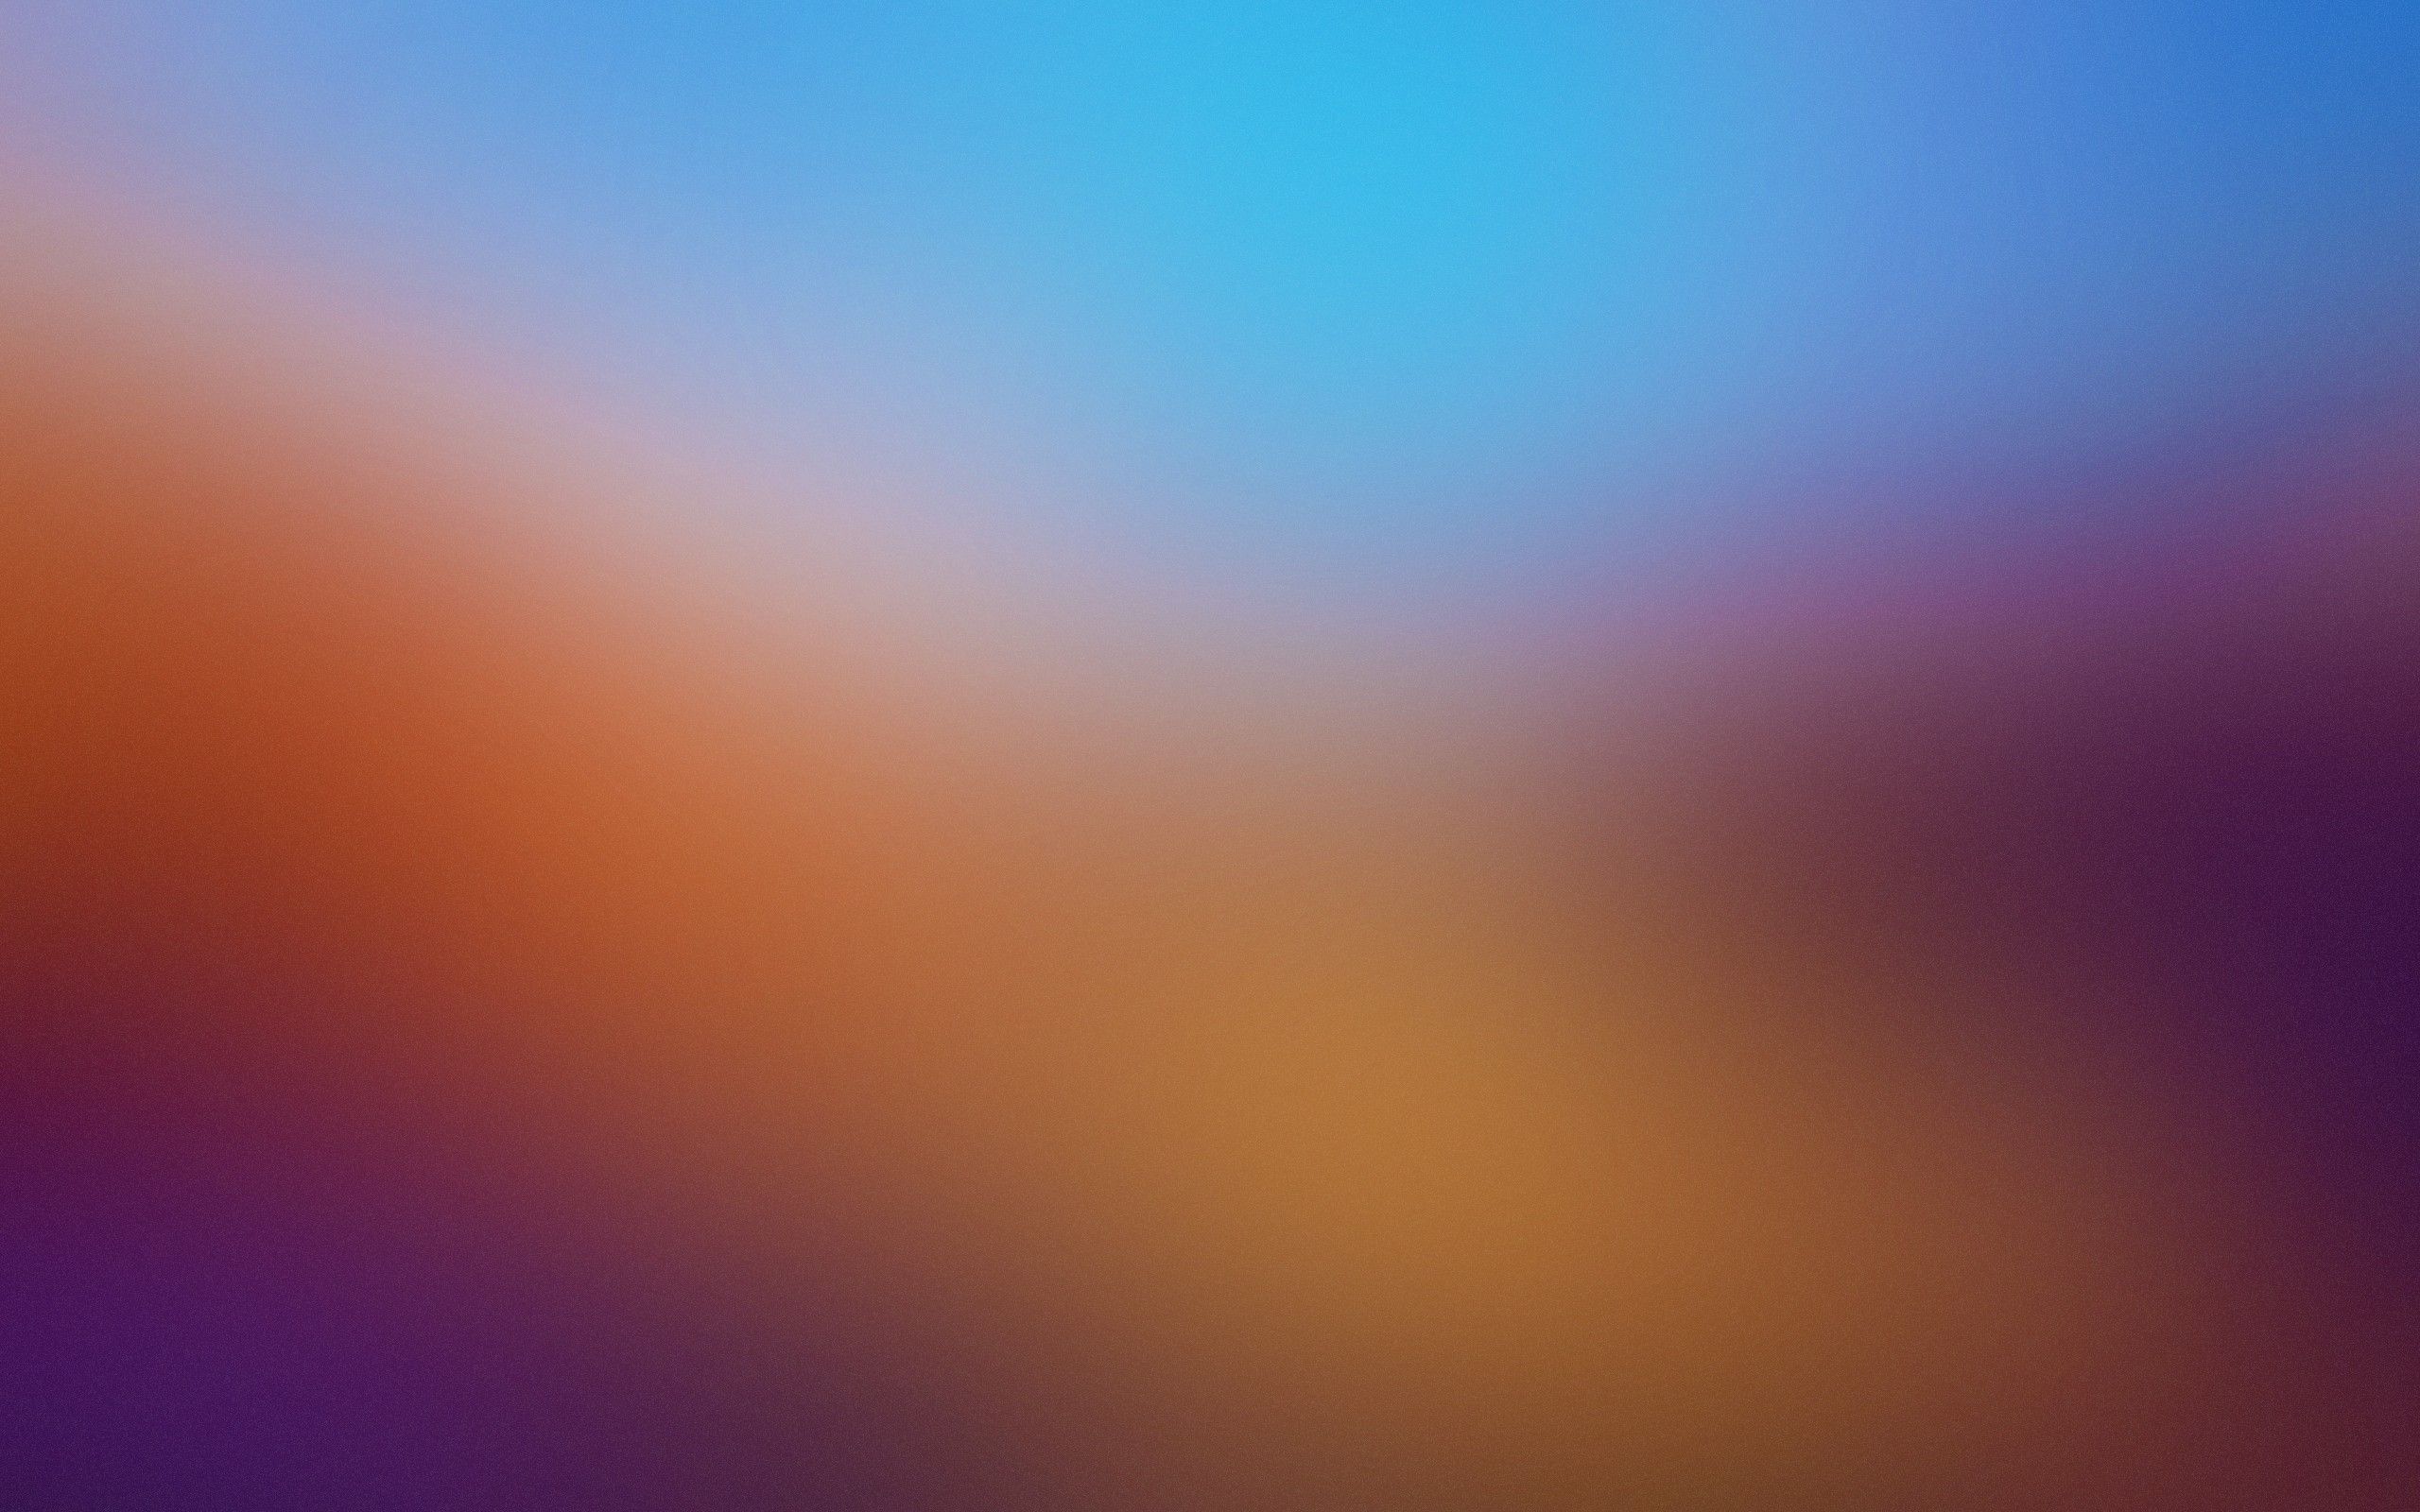 Blurred wallpapers | WallpaperUP